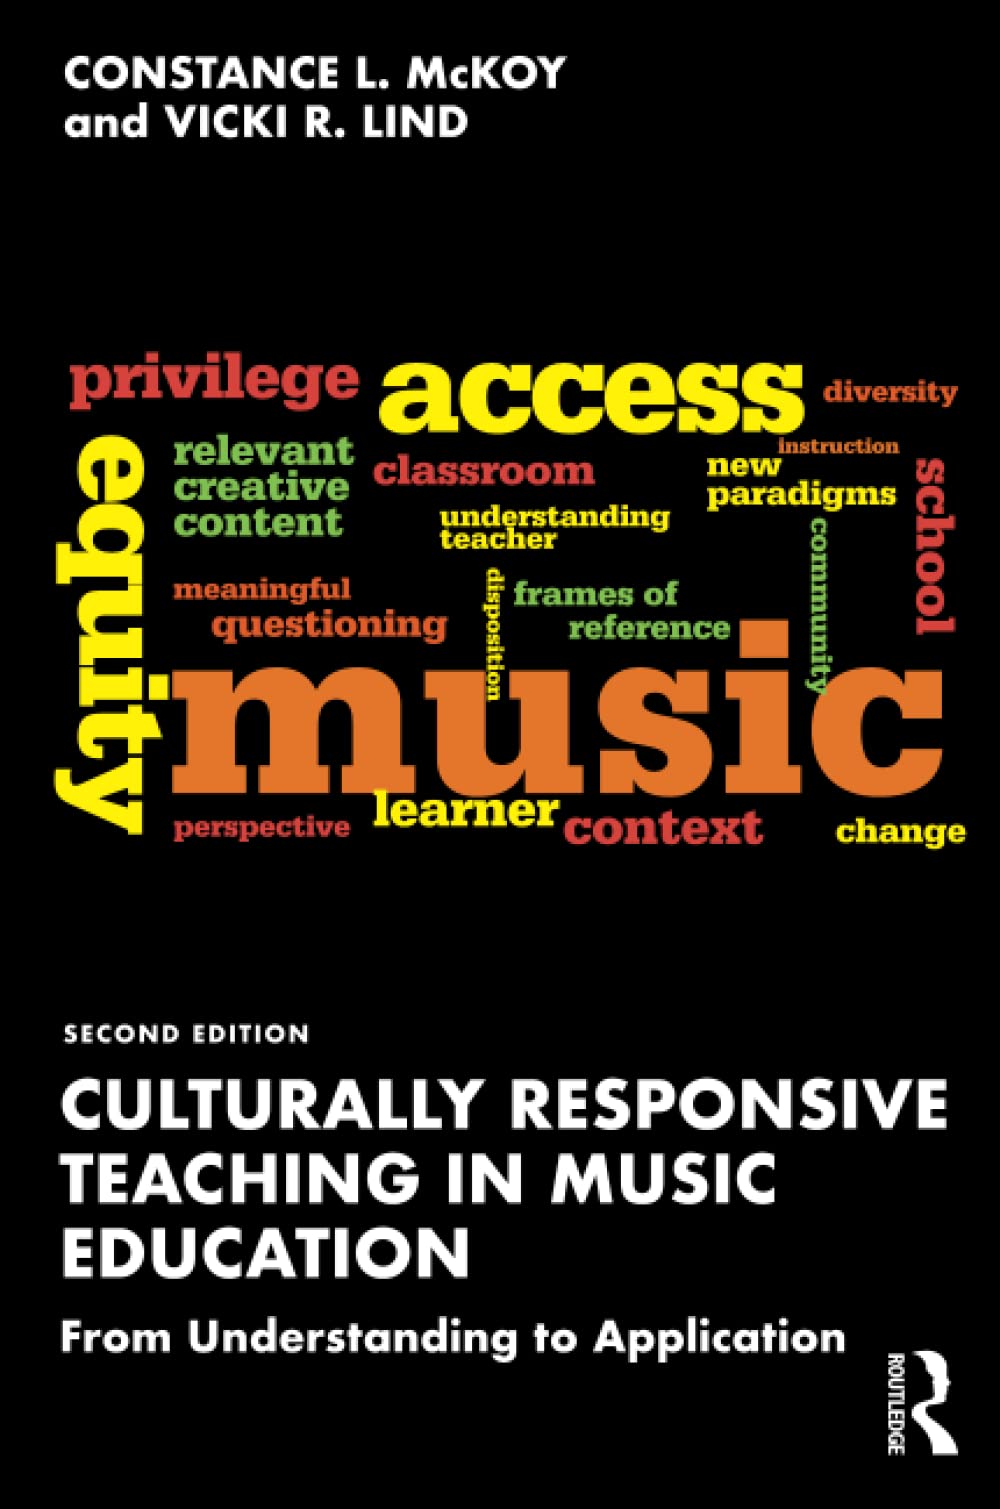 Culturally Responsive Teaching in Music Education // From Understanding to Application